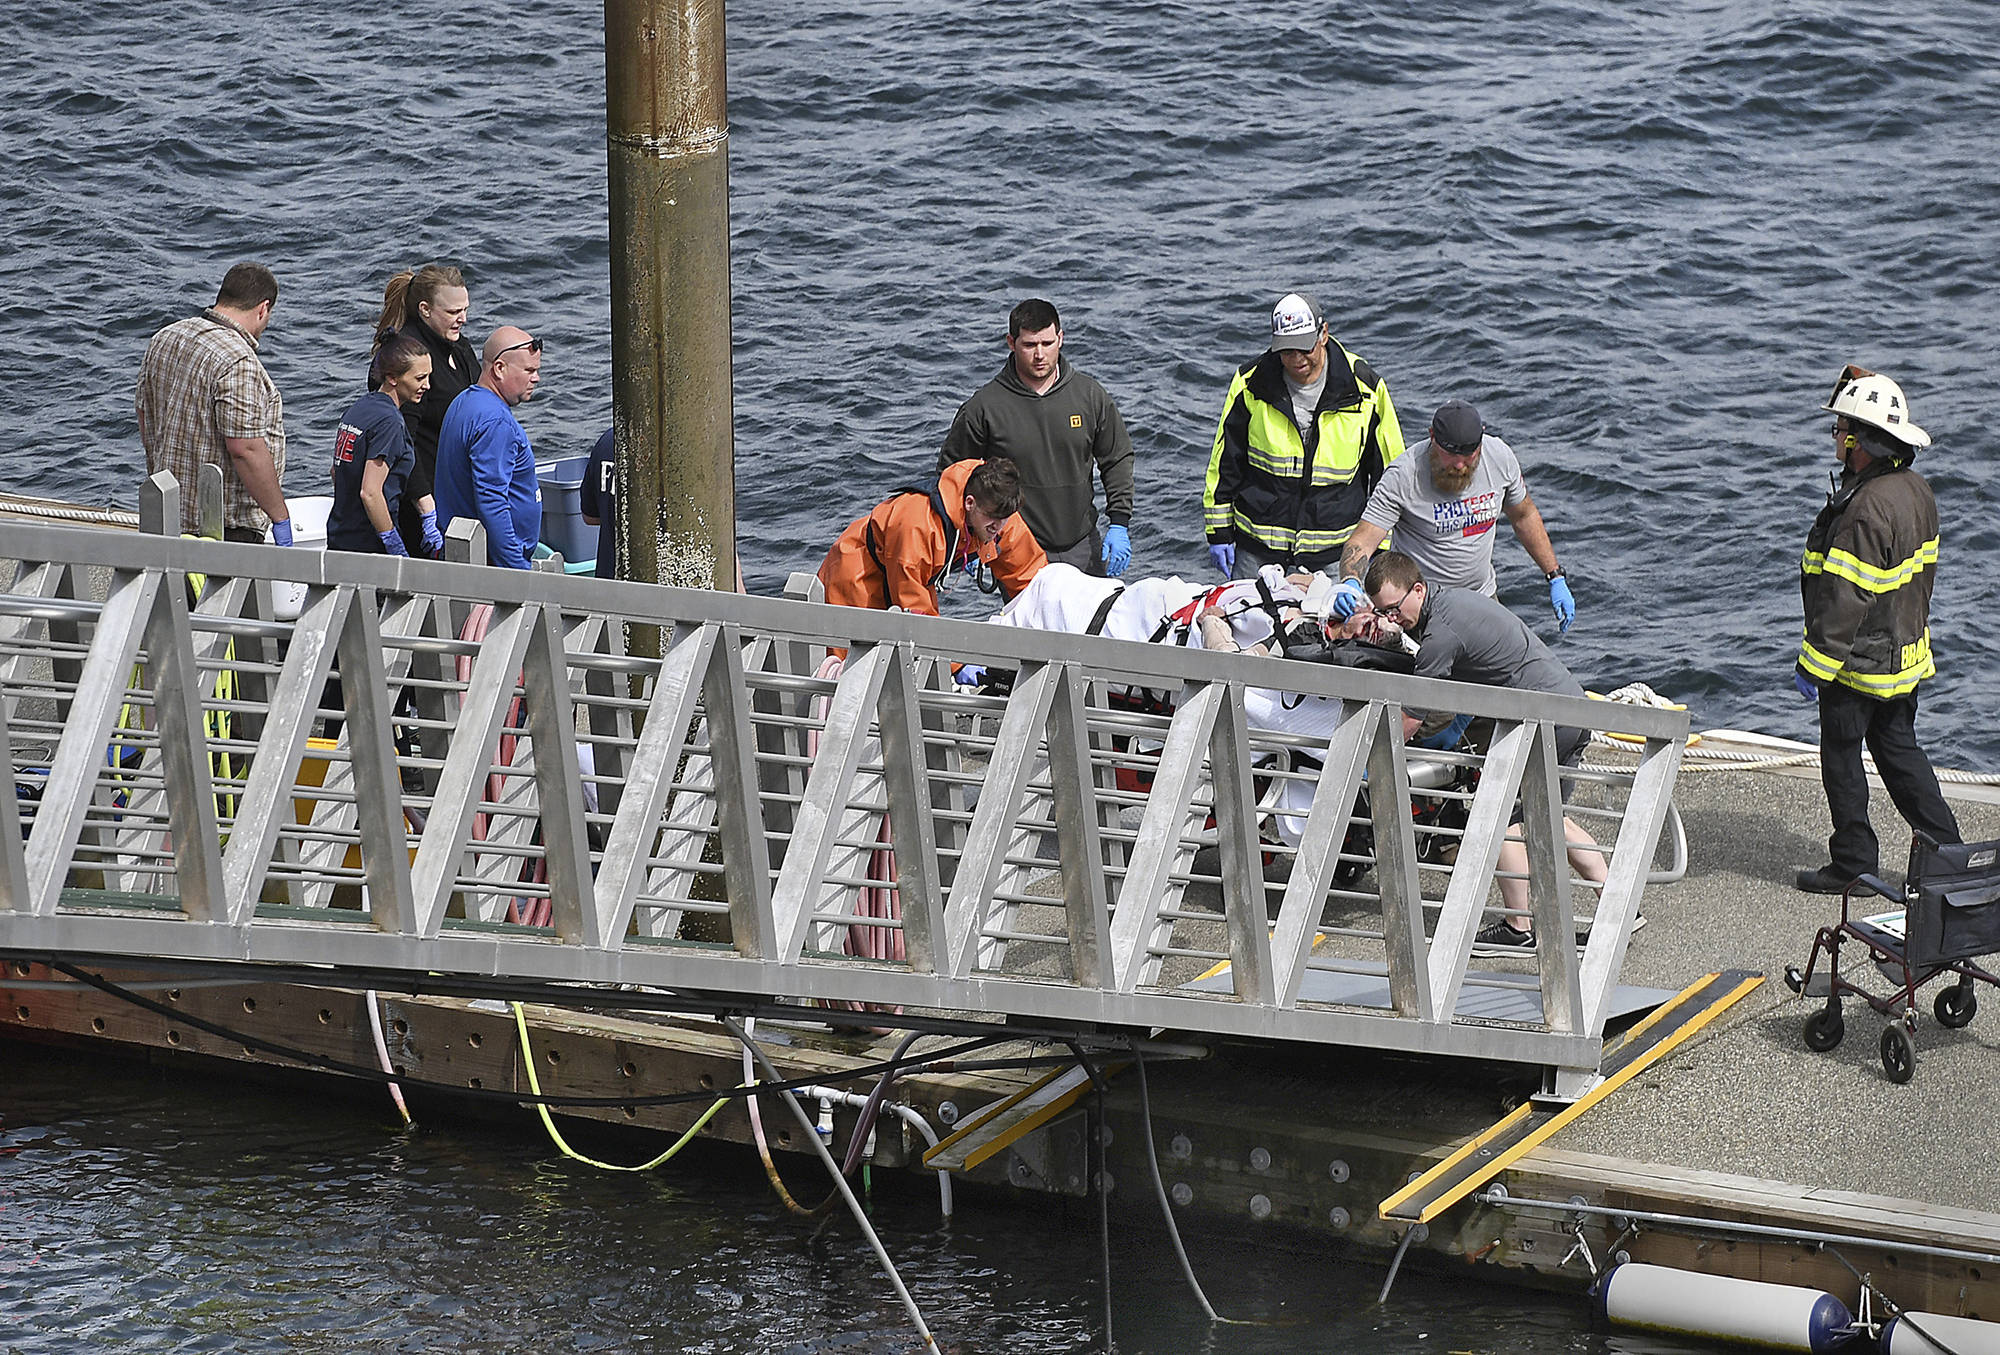 Emergency response crews transport an injured passenger to an ambulance at the George Inlet Lodge docks, Monday, May 13, 2019, in Ketchikan, Alaska. The passenger was from one of two sightseeing planes reported down in George Inlet early Monday afternoon and was dropped off by a U.S. Coast Guard 45-foot response boat. (Dustin Safranek/Ketchikan Daily News via AP)